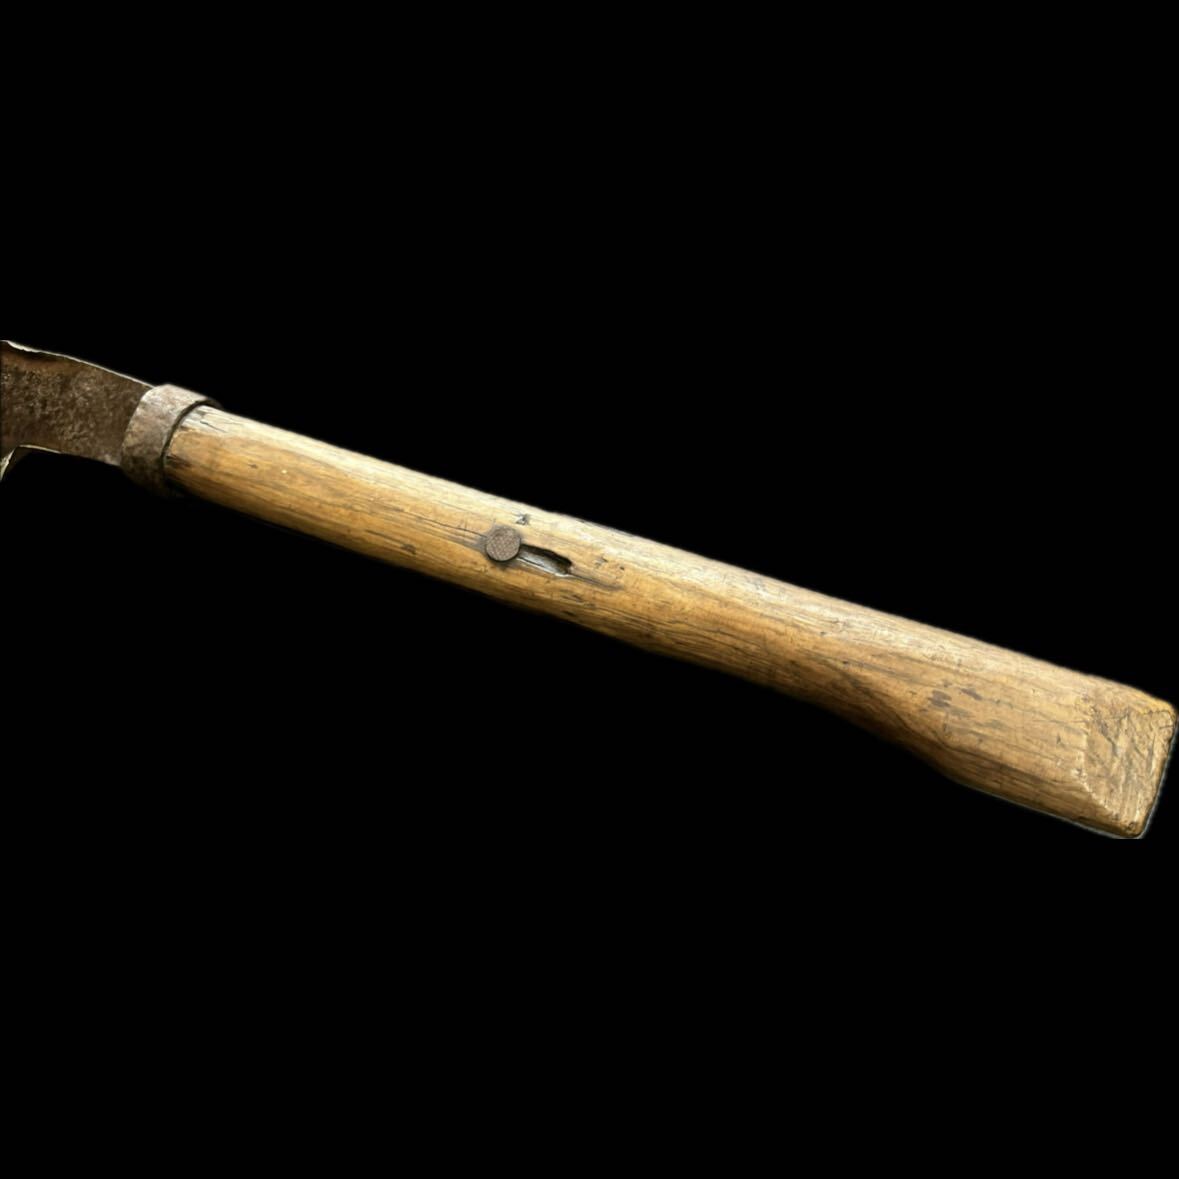 [.] mountain . era tool large branch strike . hatchet thickness blade hand strike ( wood-chopping material tree . mountain work . industry ... Solo camp outdoor )